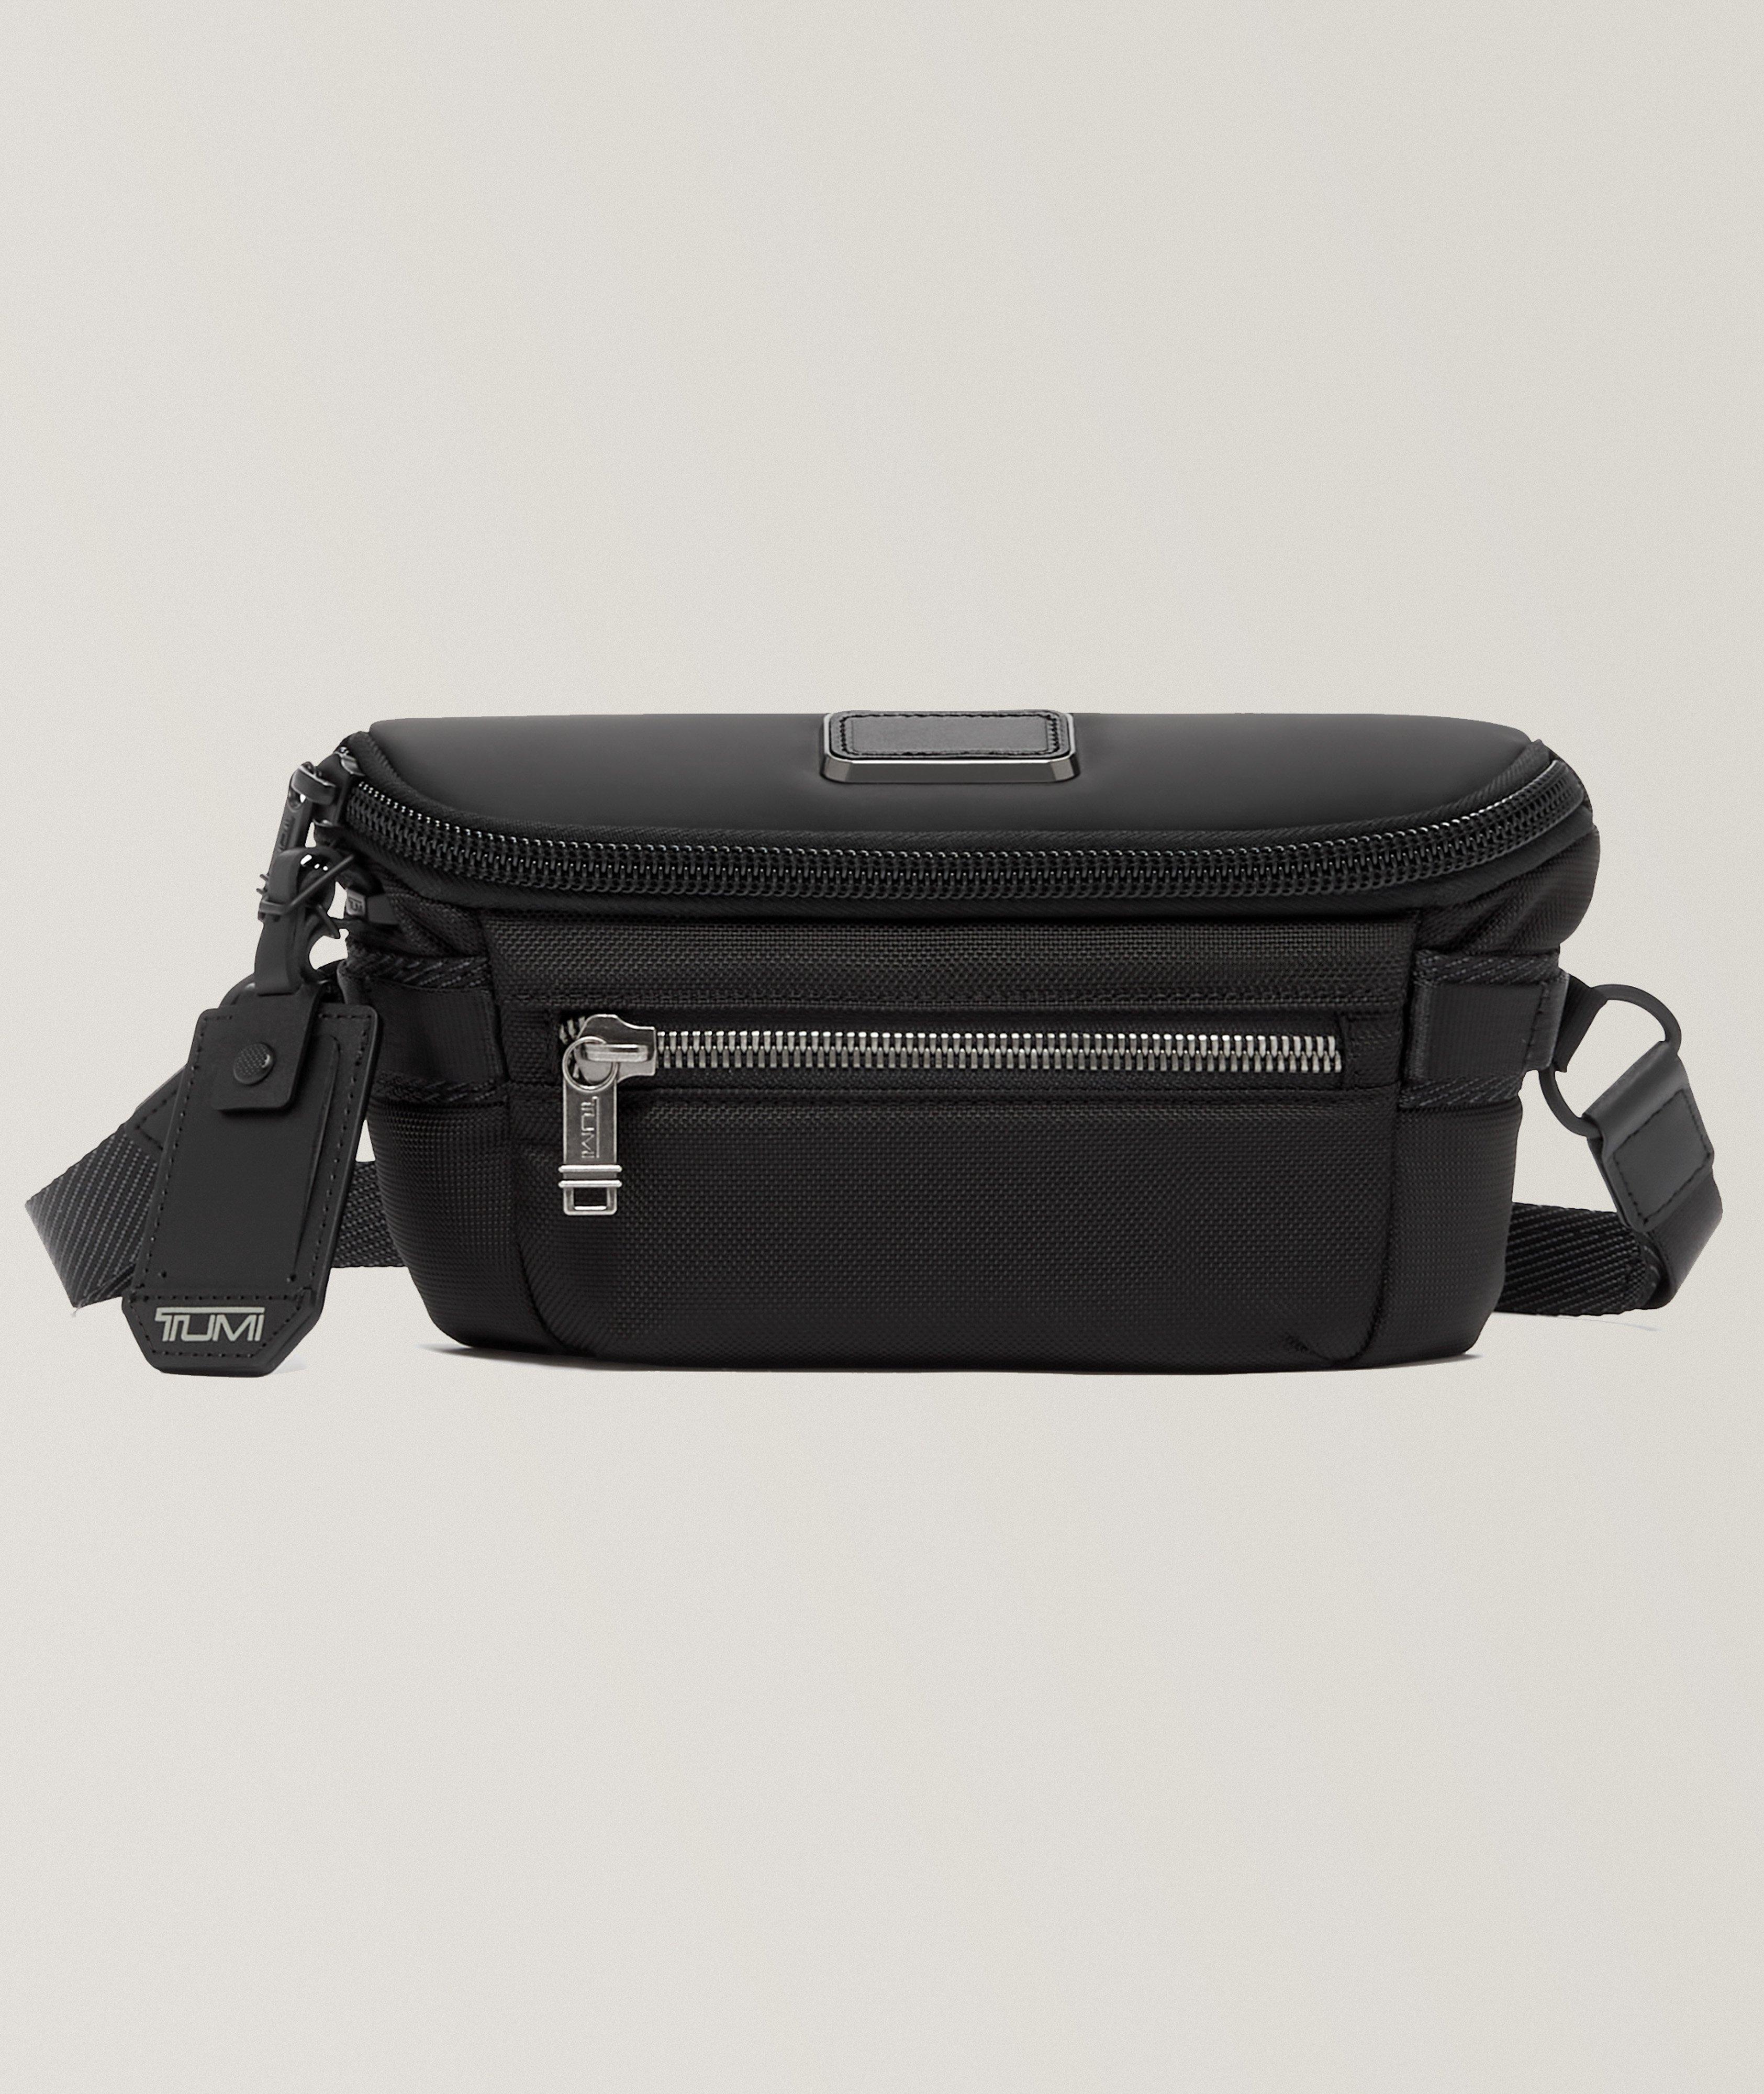 Tumi Classified Waist Pack | Bags & Cases | Harry Rosen